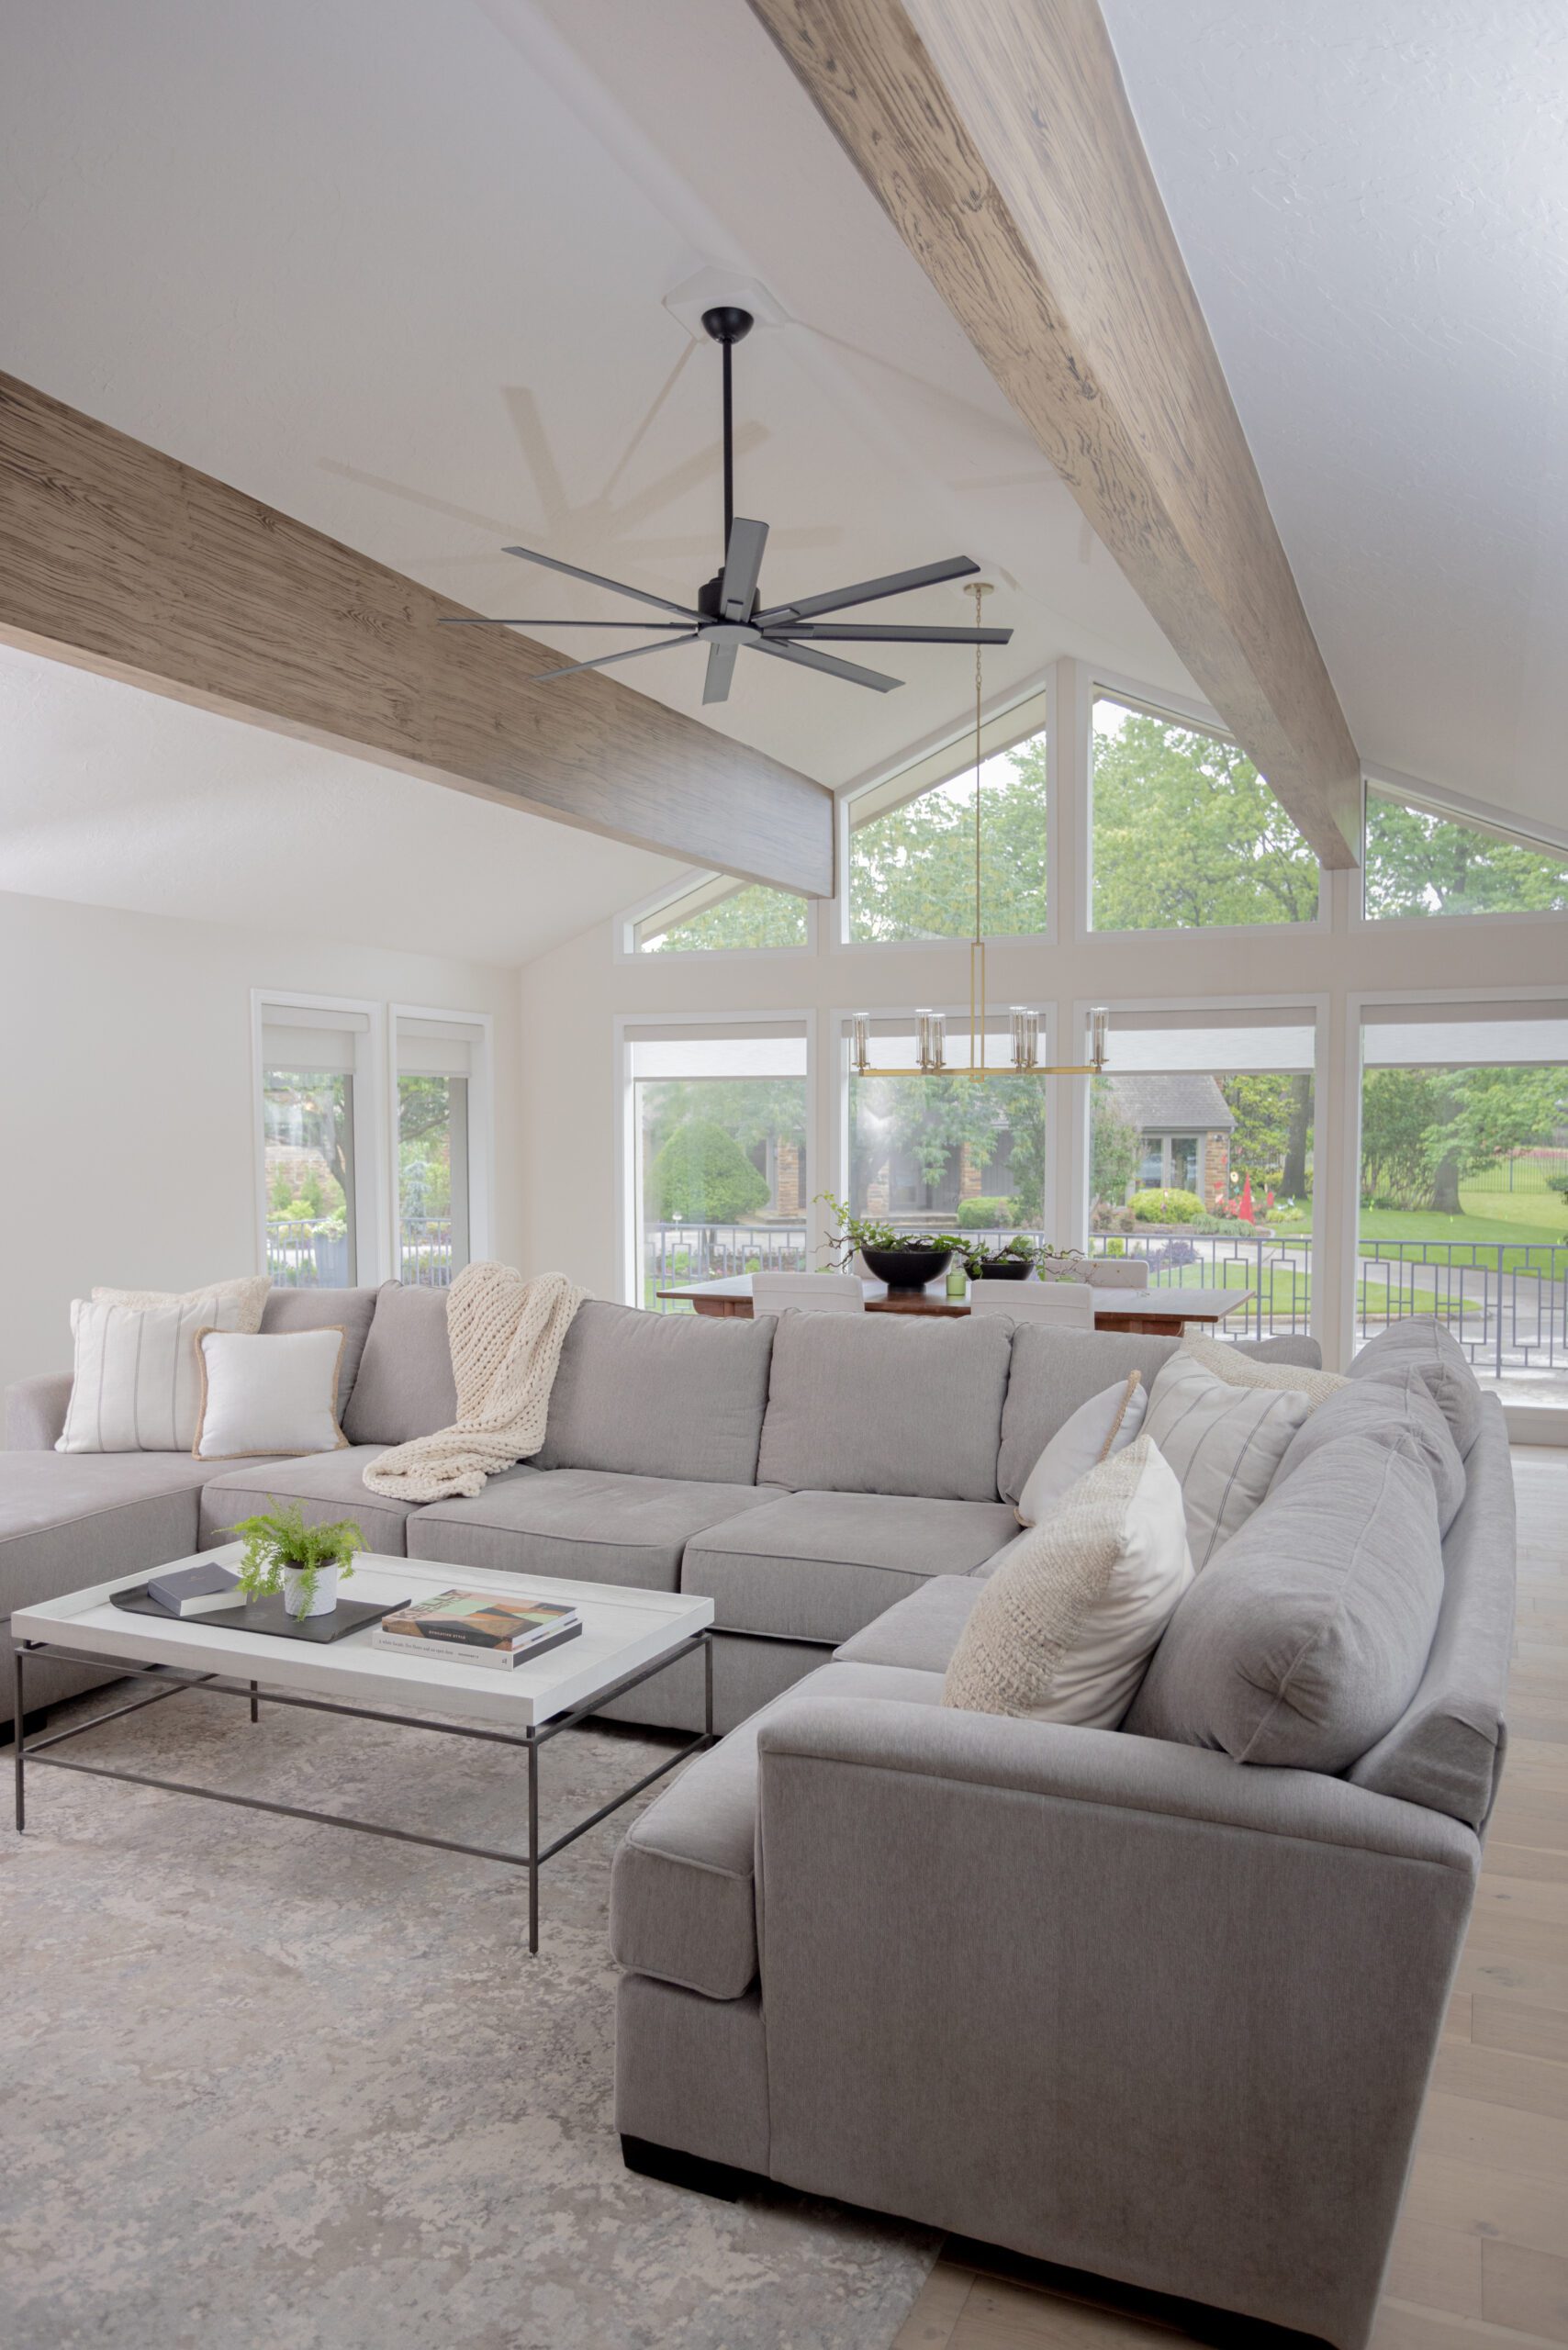 family room with vaulted ceilings and wood beams interior design by Kirkendall Design in Tulsa